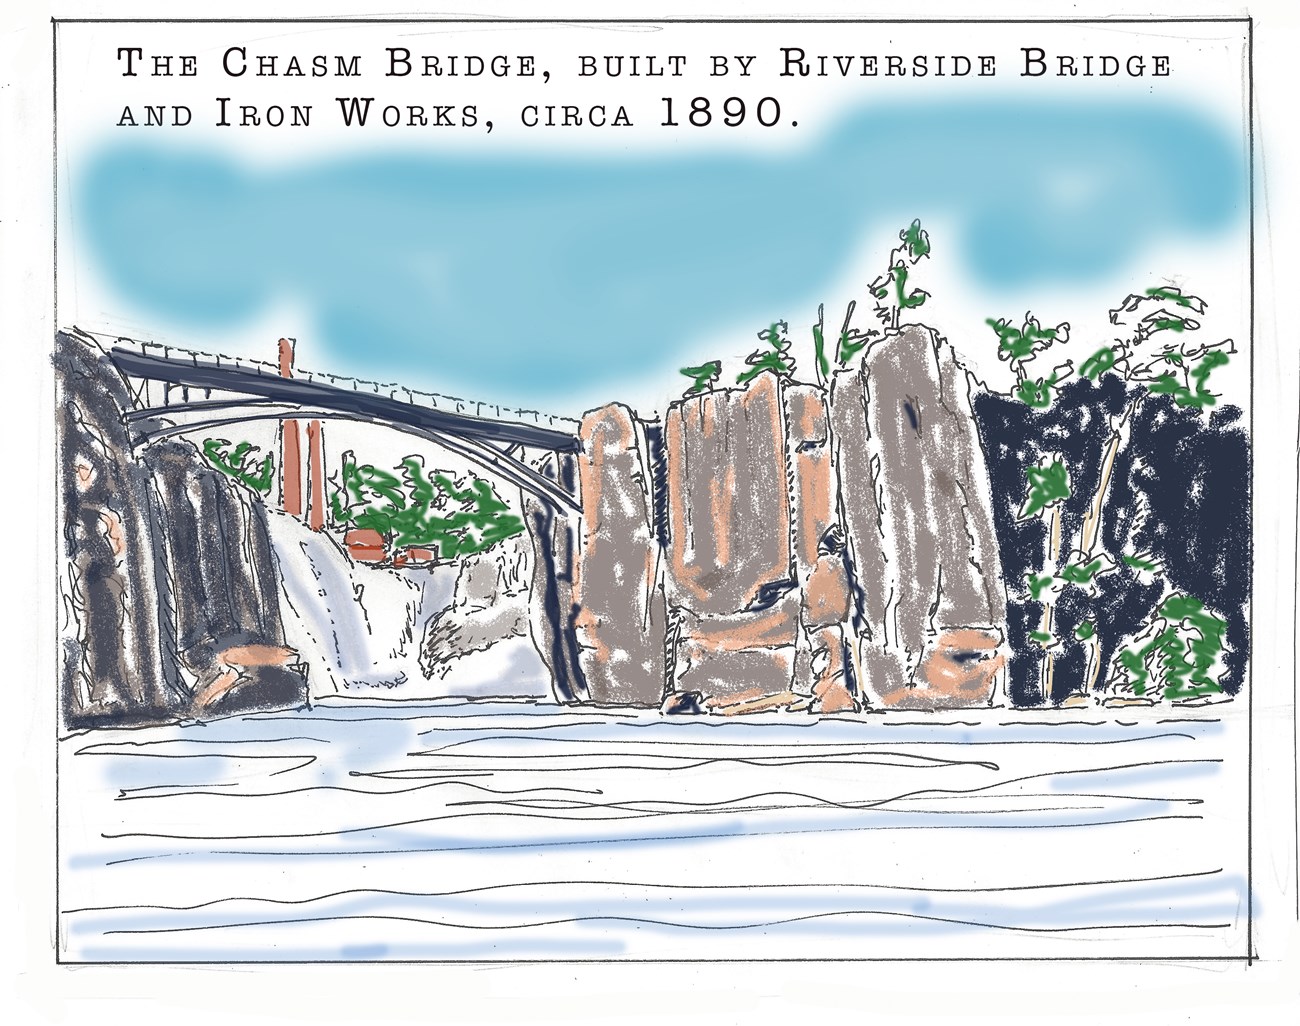 A hand-drawn view of "The Chasm Bridge, Built by Riverside Bridge & Iron Works, Circa 1890" - water falls 77 ft down a chasm spanned by an arched black metal bridge with red brick industrial buildings in the far background